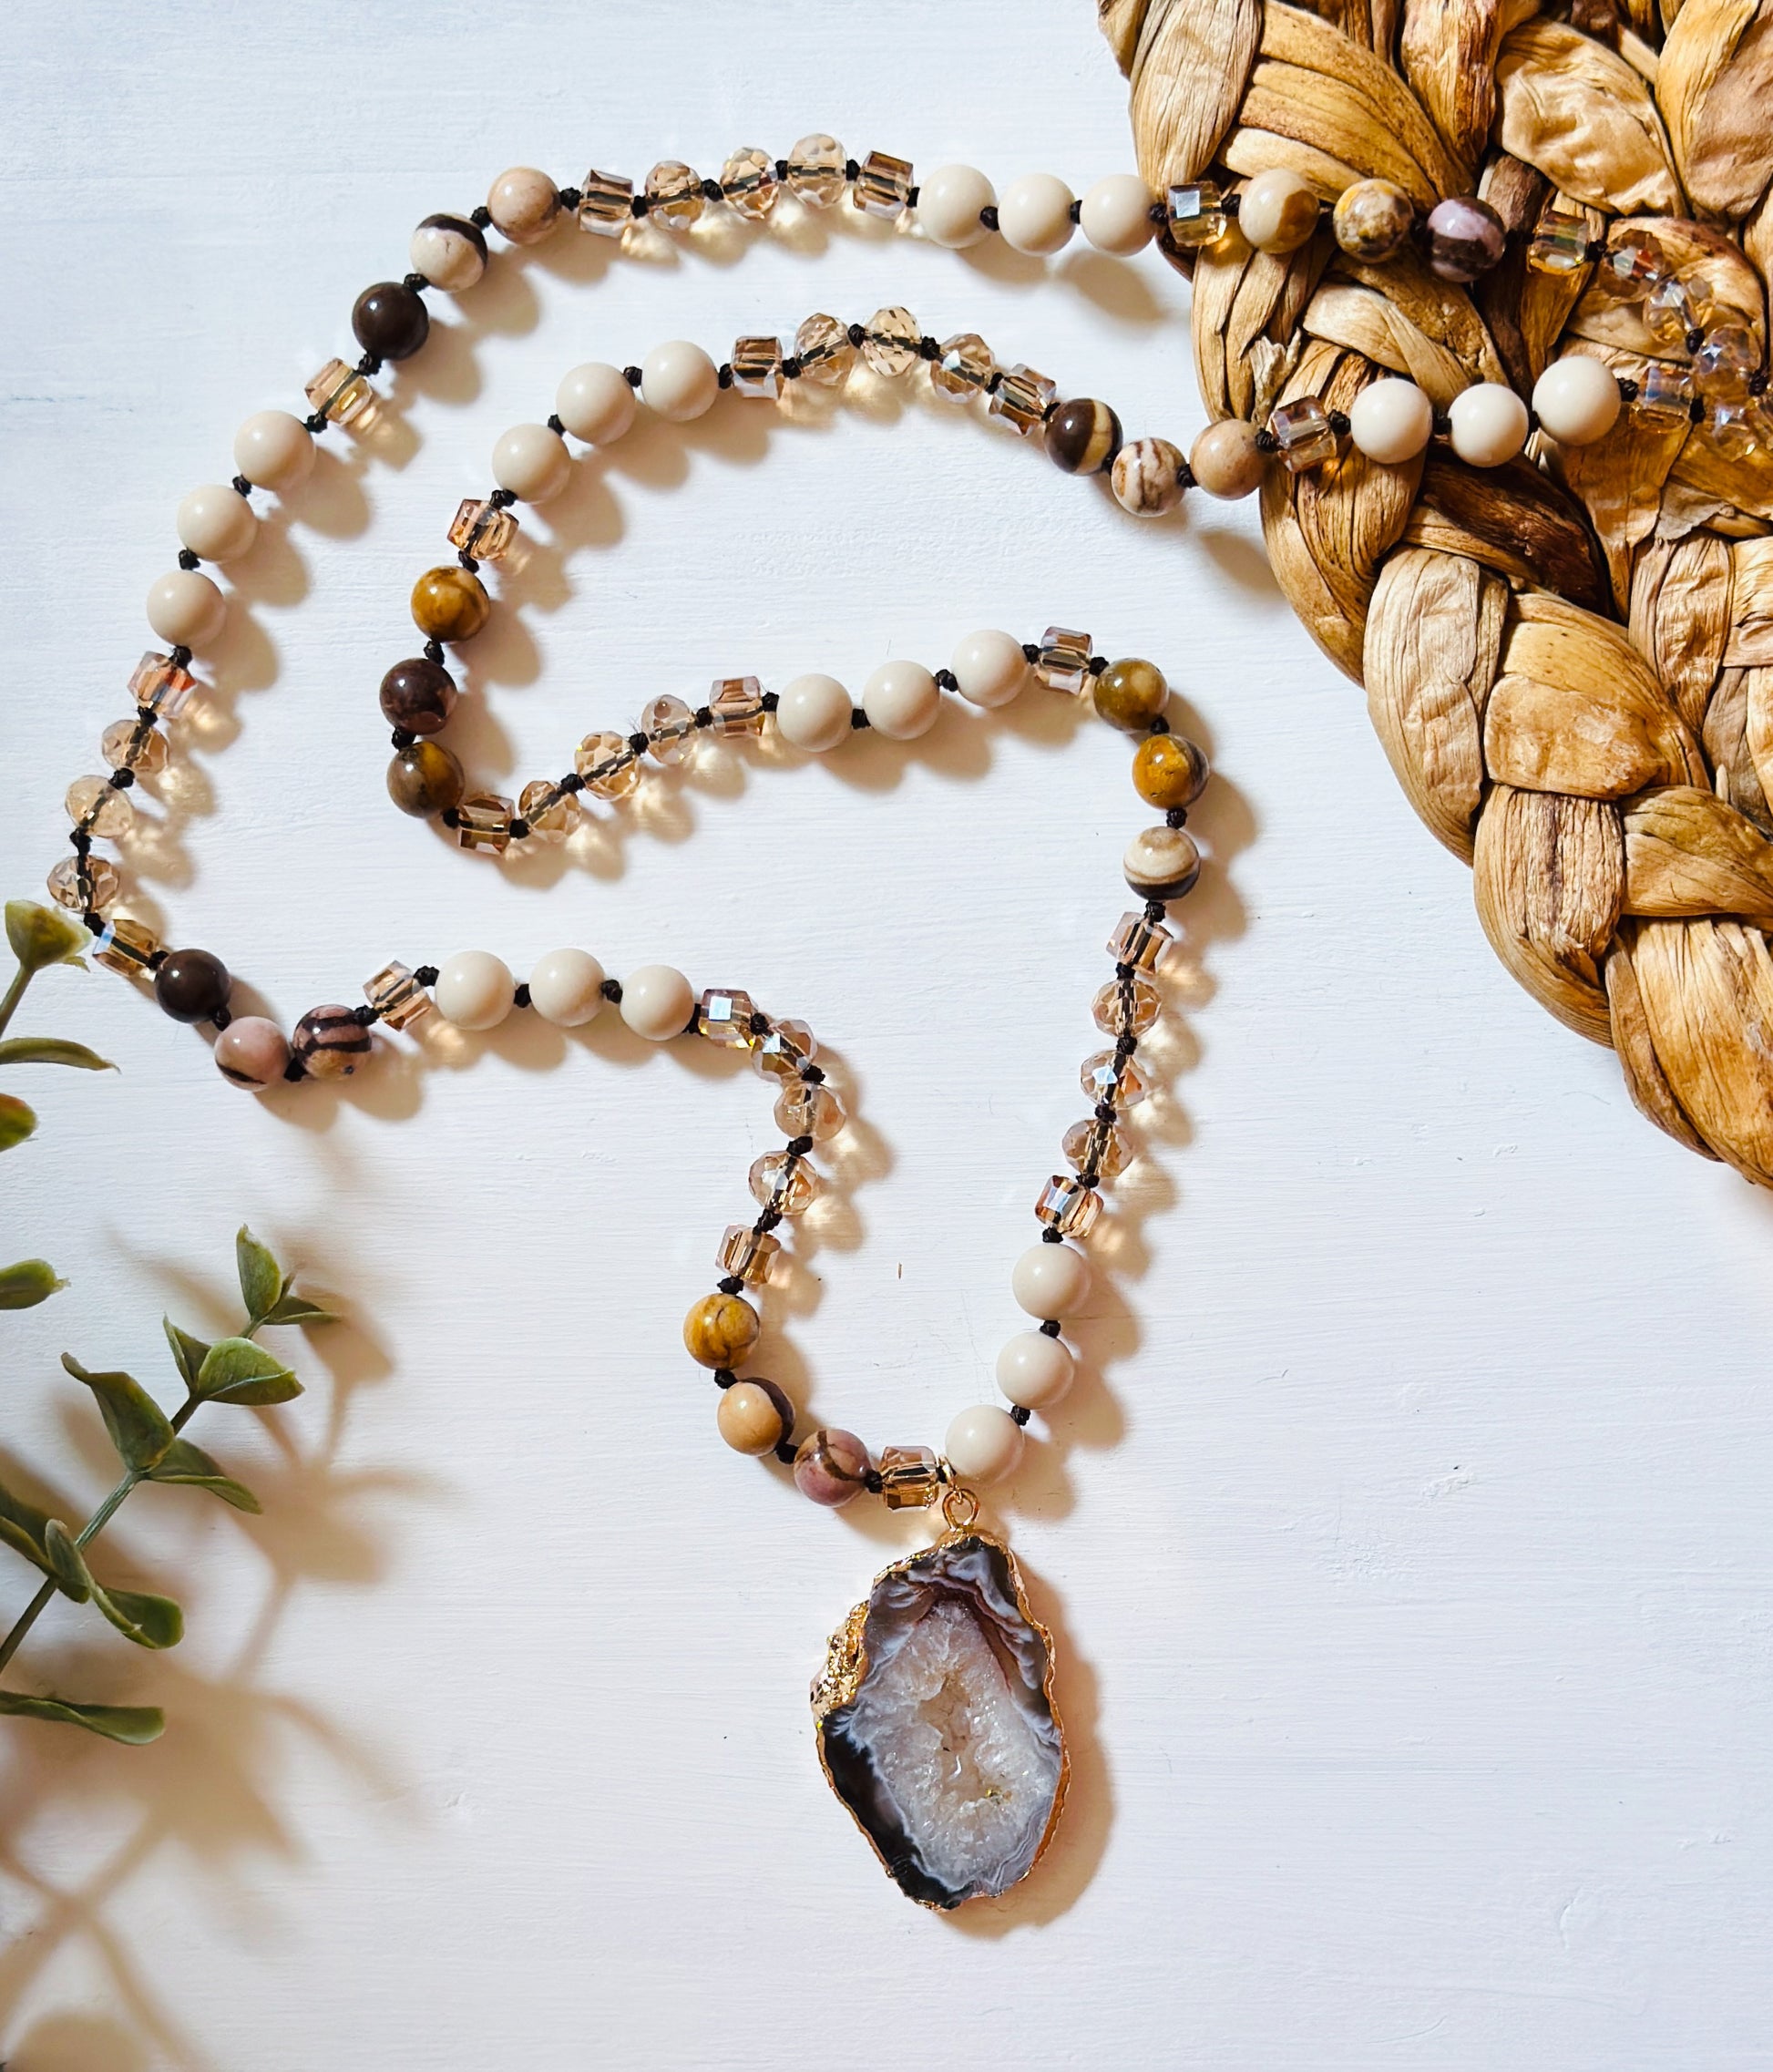 Gemstone necklace with a druzy agate pendant